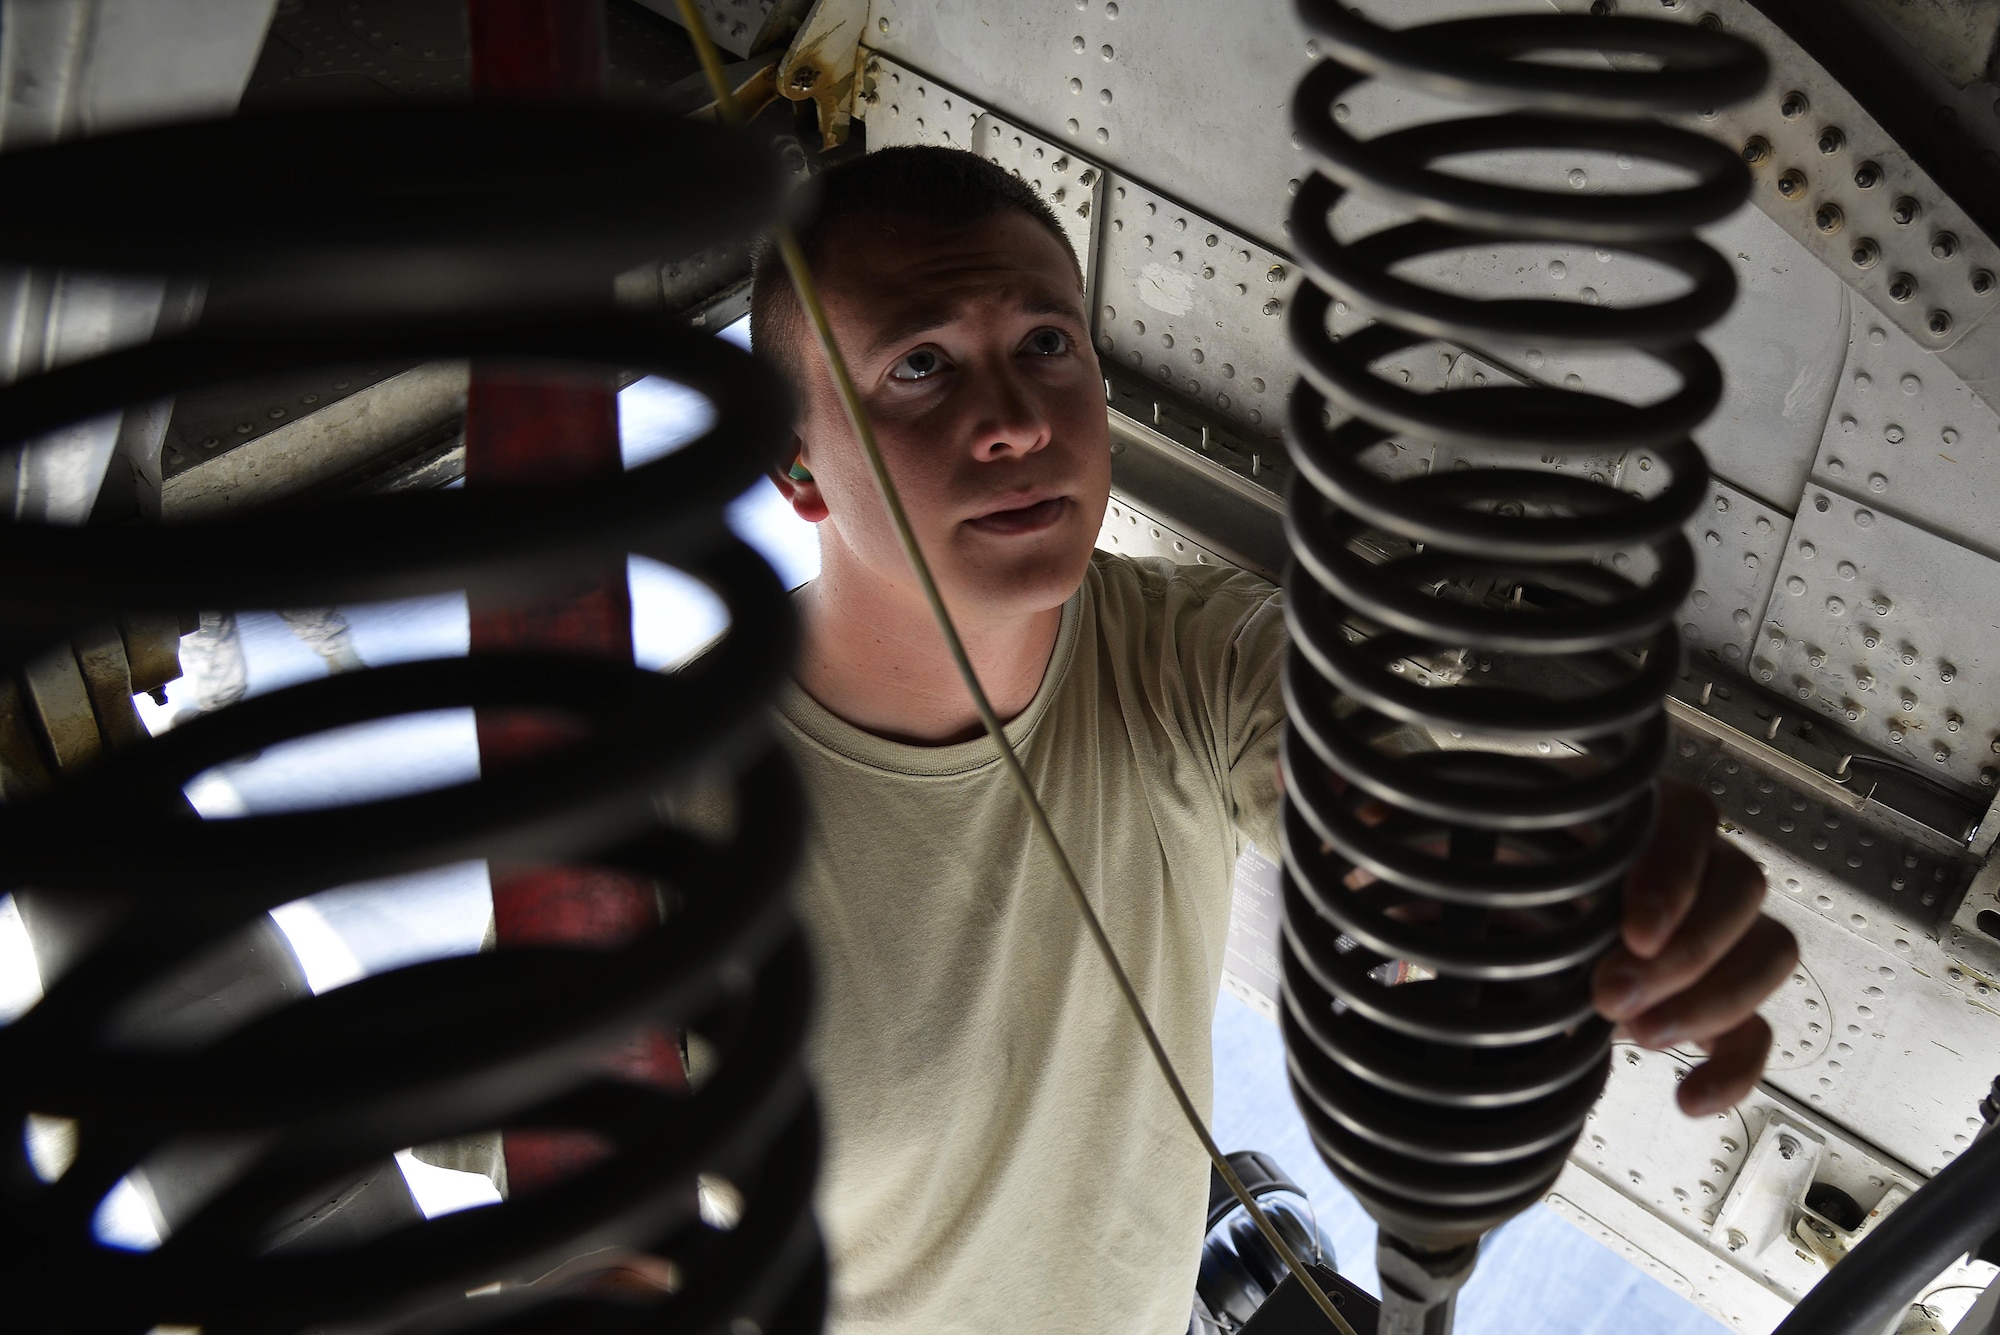 Staff Sgt. Michael inspects the retract system on the nose strut of a KC-10 Extender at an undisclosed location in Southwest Asia May 12, 2015. The retract system lowers and raises the landing gear. Michael is a crew chief assigned to the Expeditionary Aircraft Maintenance Squadron. (U.S. Air Force photo/Tech. Sgt. Christopher Boitz)